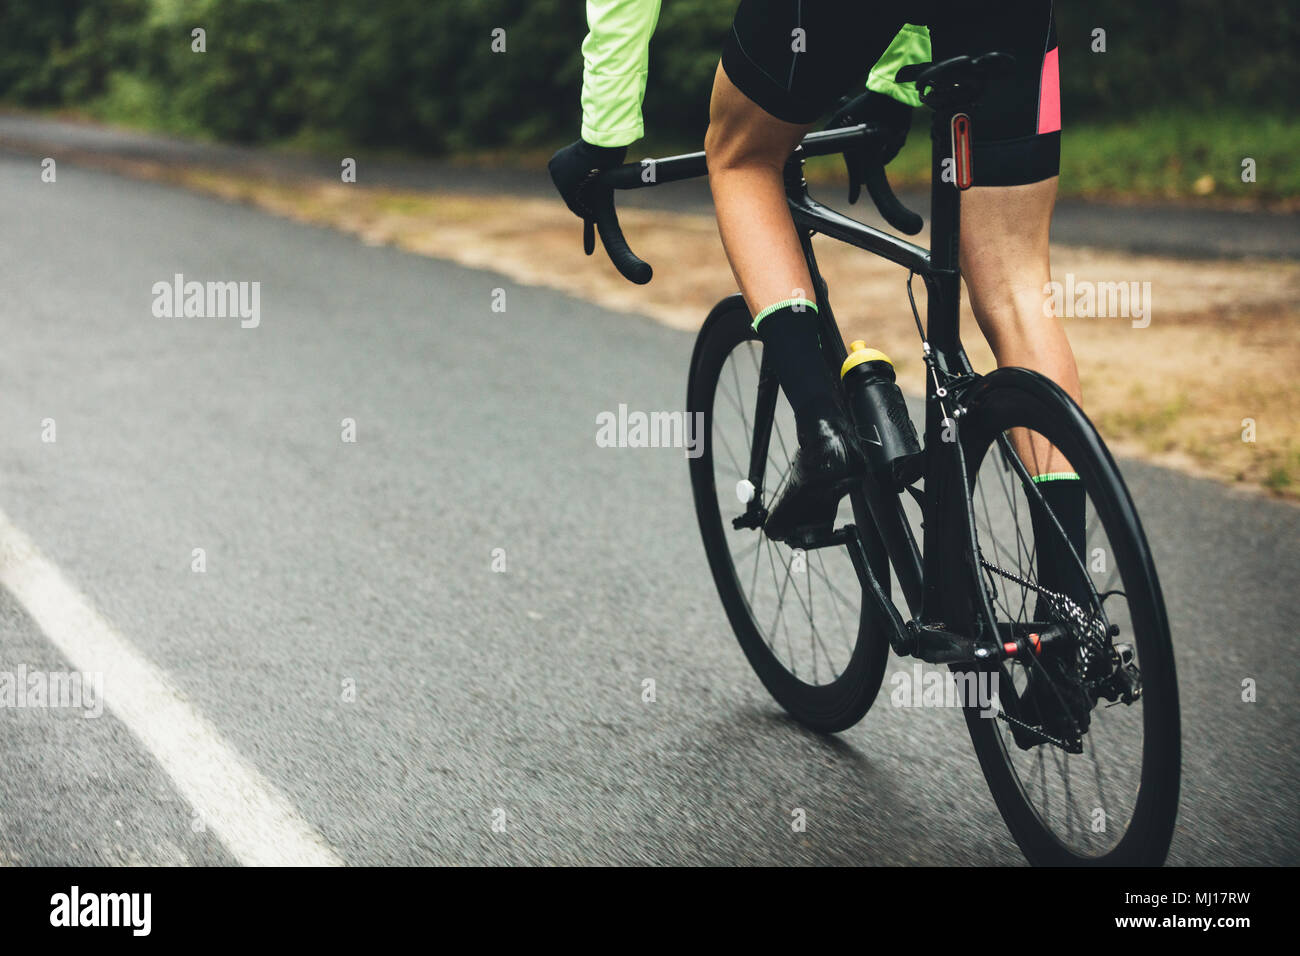 Male athlete cycling on country road. Cropped shot of man riding bicycle on wet road, practicing for a competition. Stock Photo